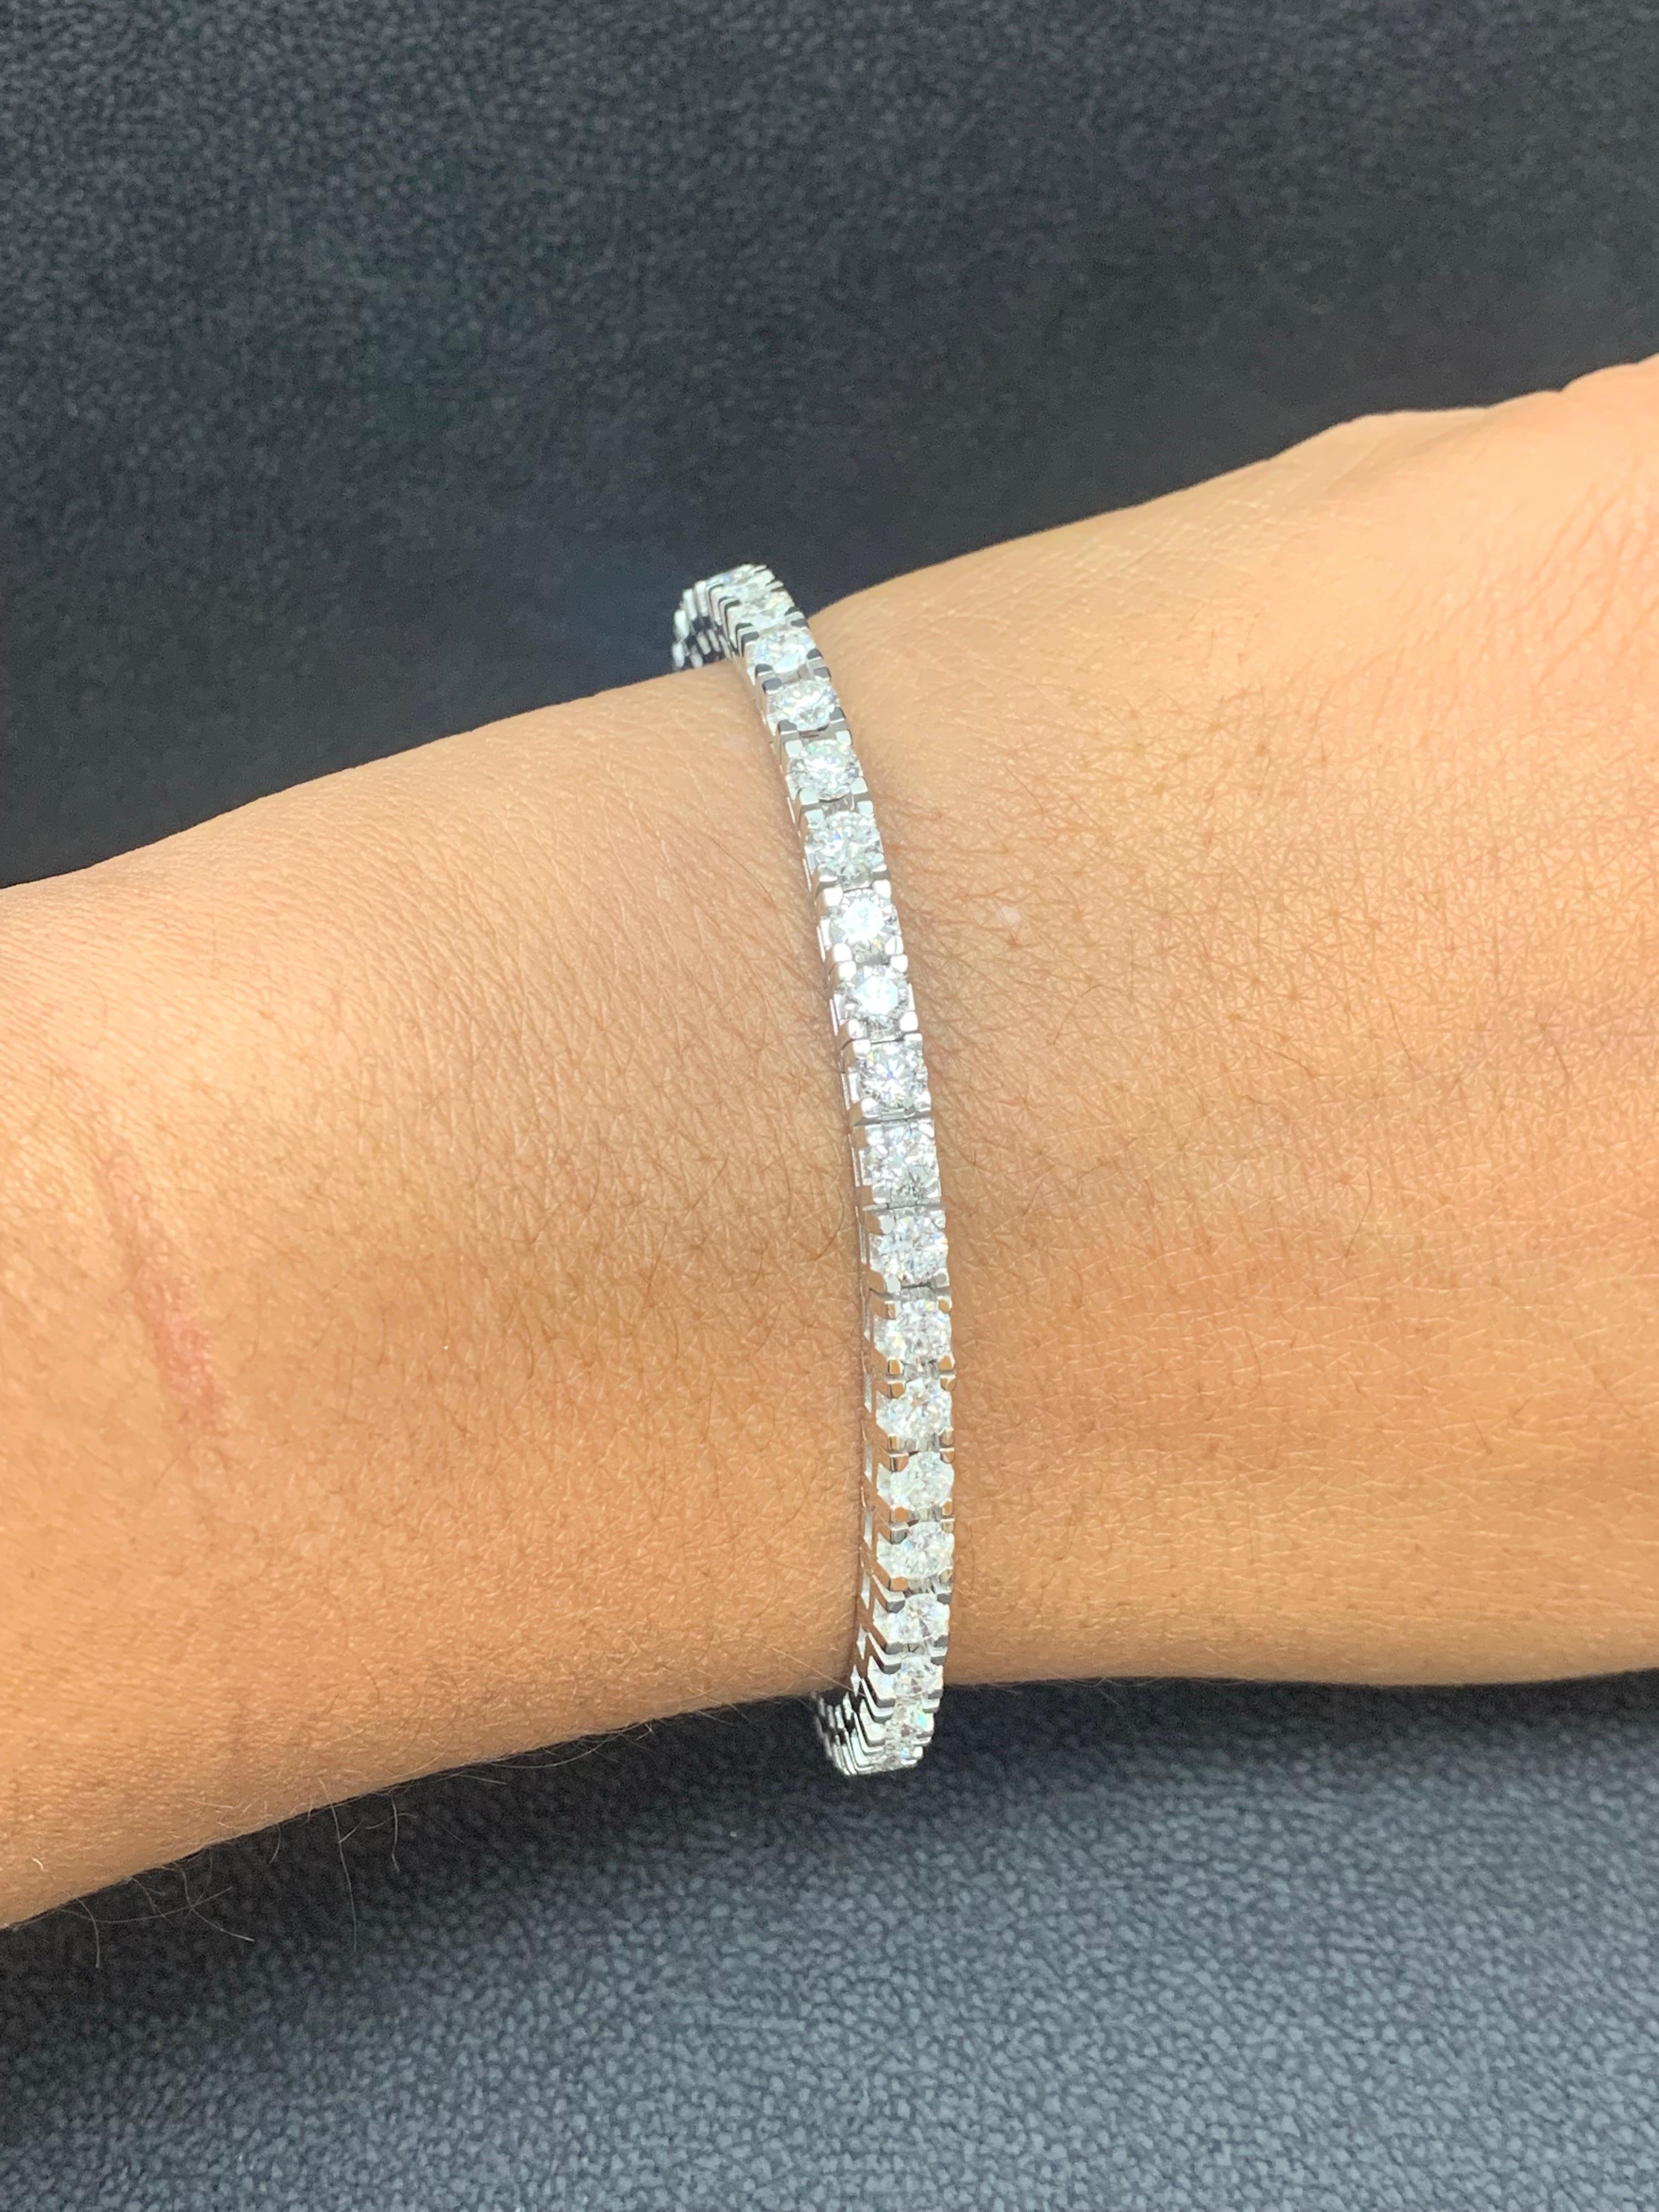 A classic tennis bracelet style showcasing a row of round brilliant diamonds, set in a polished 14k white gold mounting. 47 Diamonds weigh 6.02 carats total and are approximately GH color, SI1 clarity.

Style available in different price ranges.